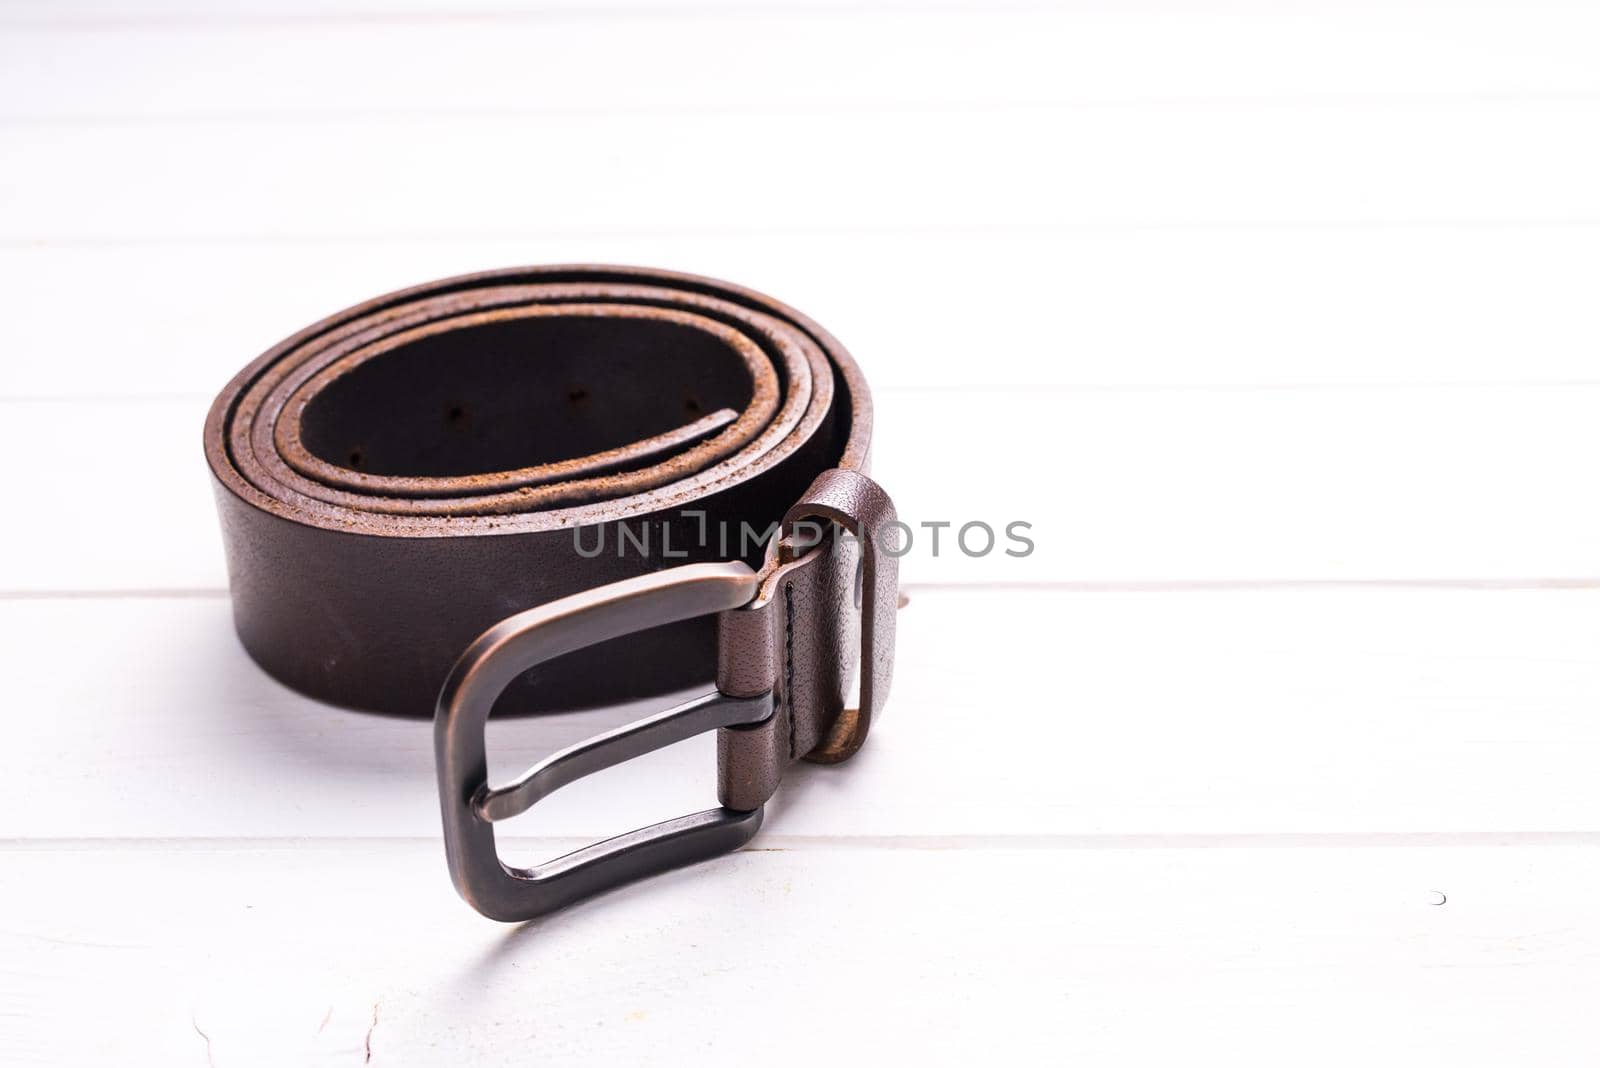 twisted brown leather belt on wooden background by GekaSkr